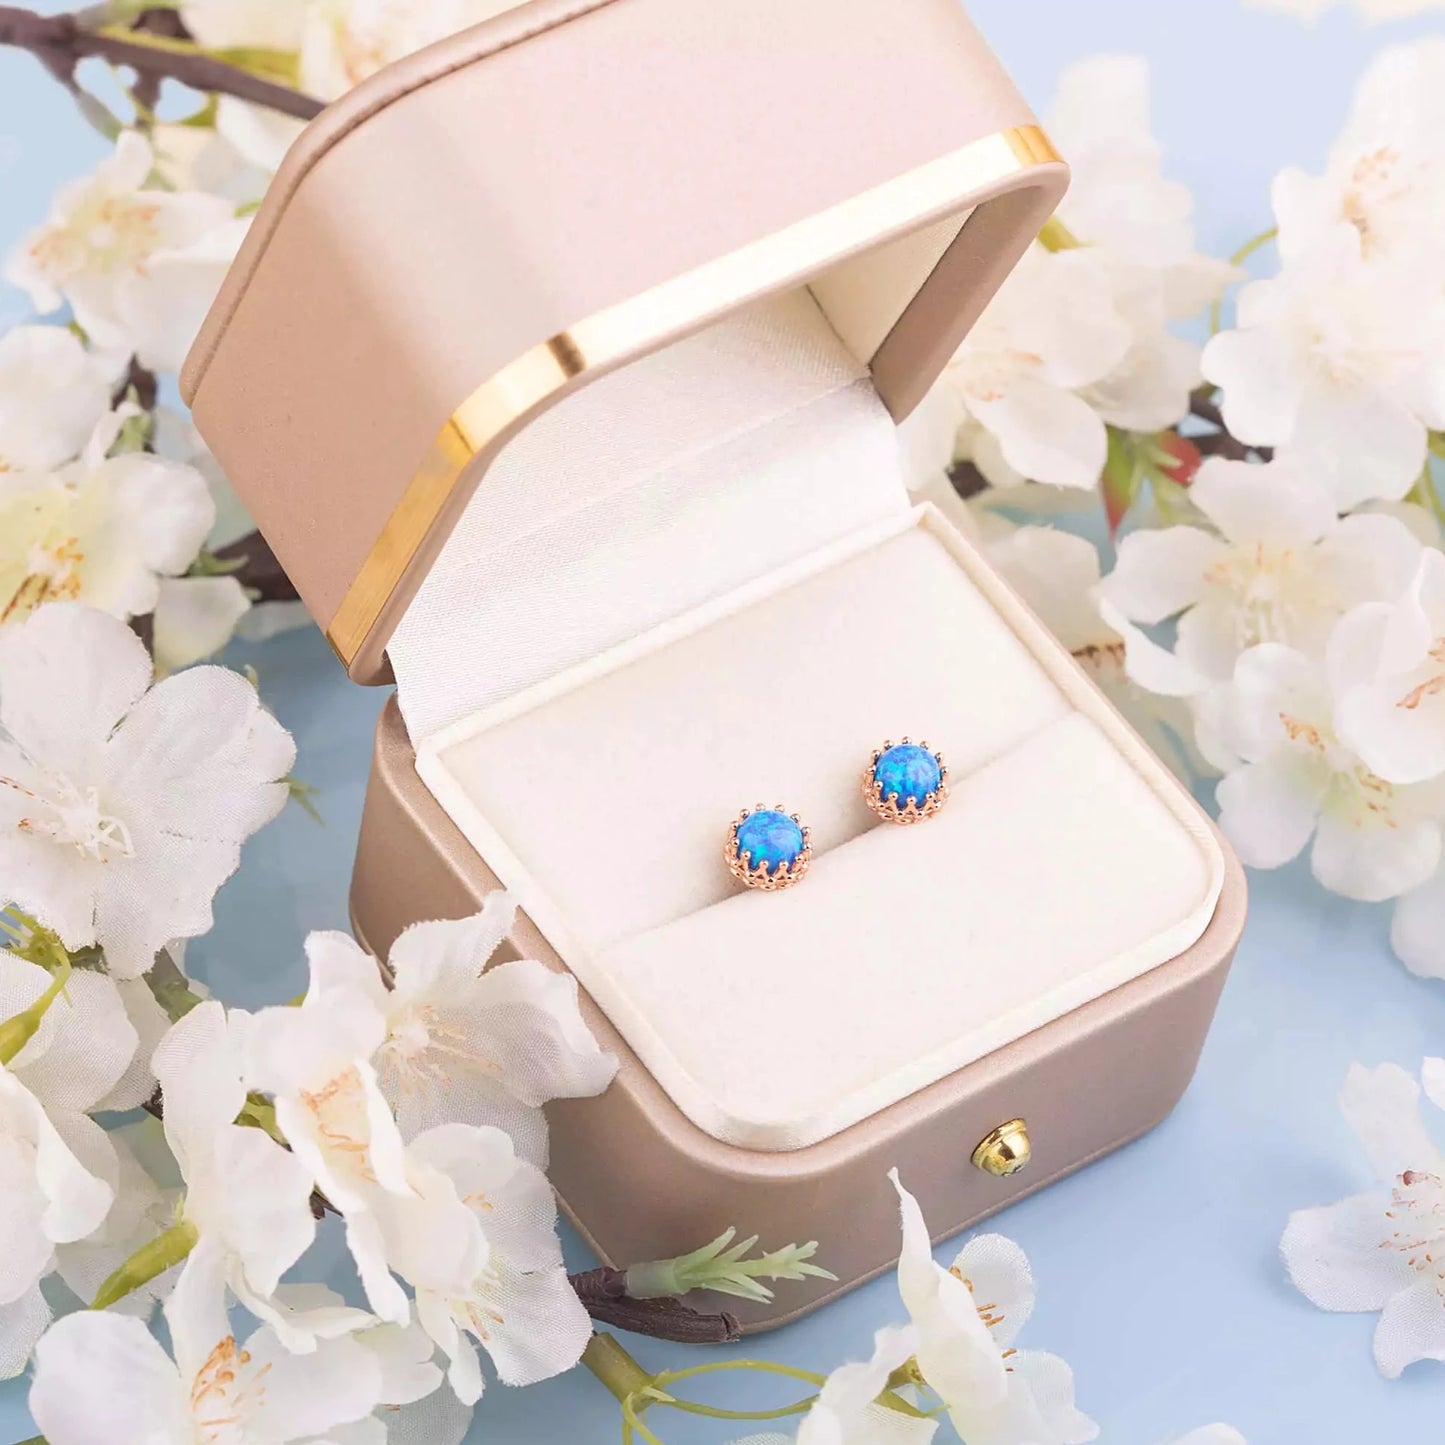 Blue opal crown studs in a gift box